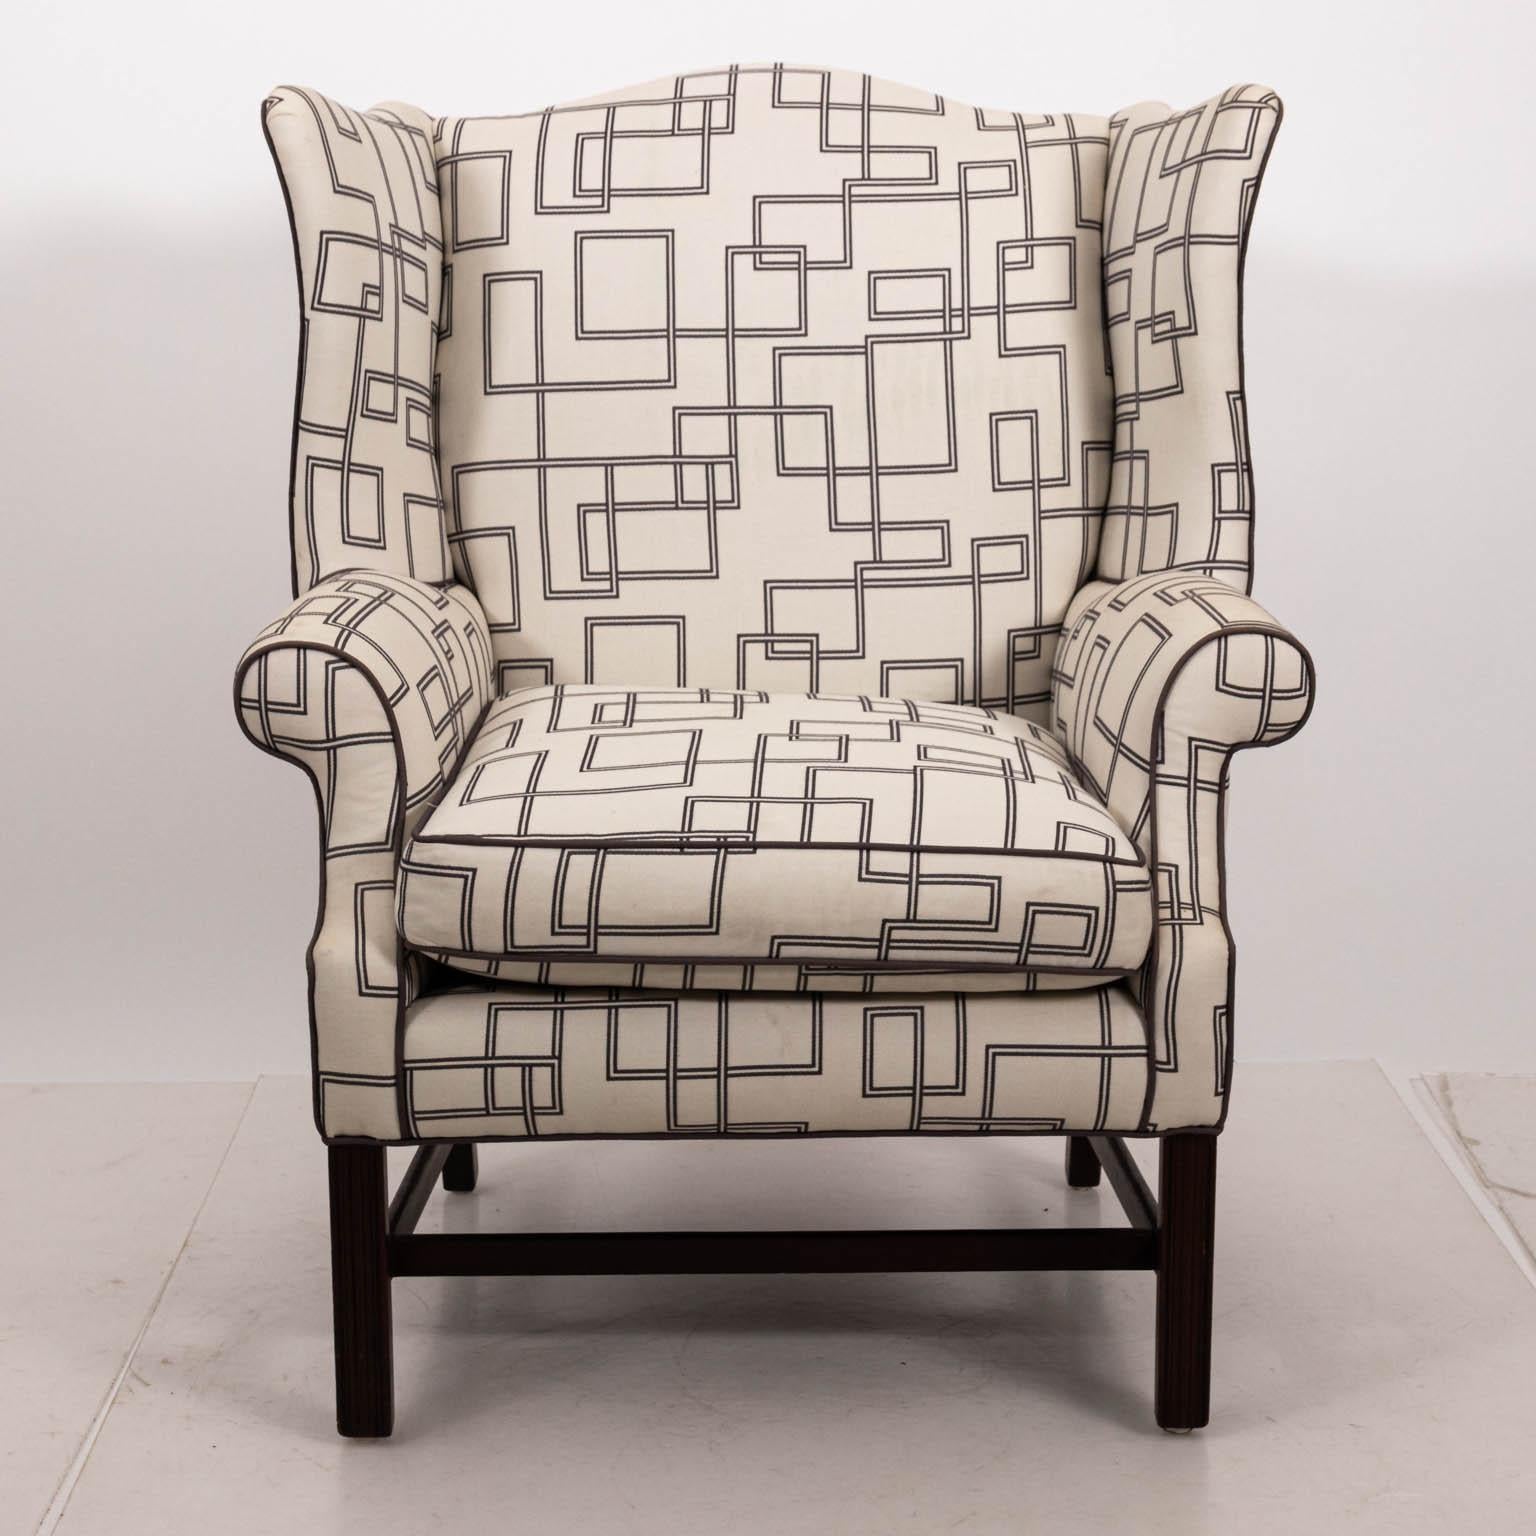 Wide wingback armchair with square wood legs and bottom stretchers, circa 21st century. The piece is also upholstered in contemporary white cotton fabric featuring geometric navy color motifs. Please note of wear consistent with age including small